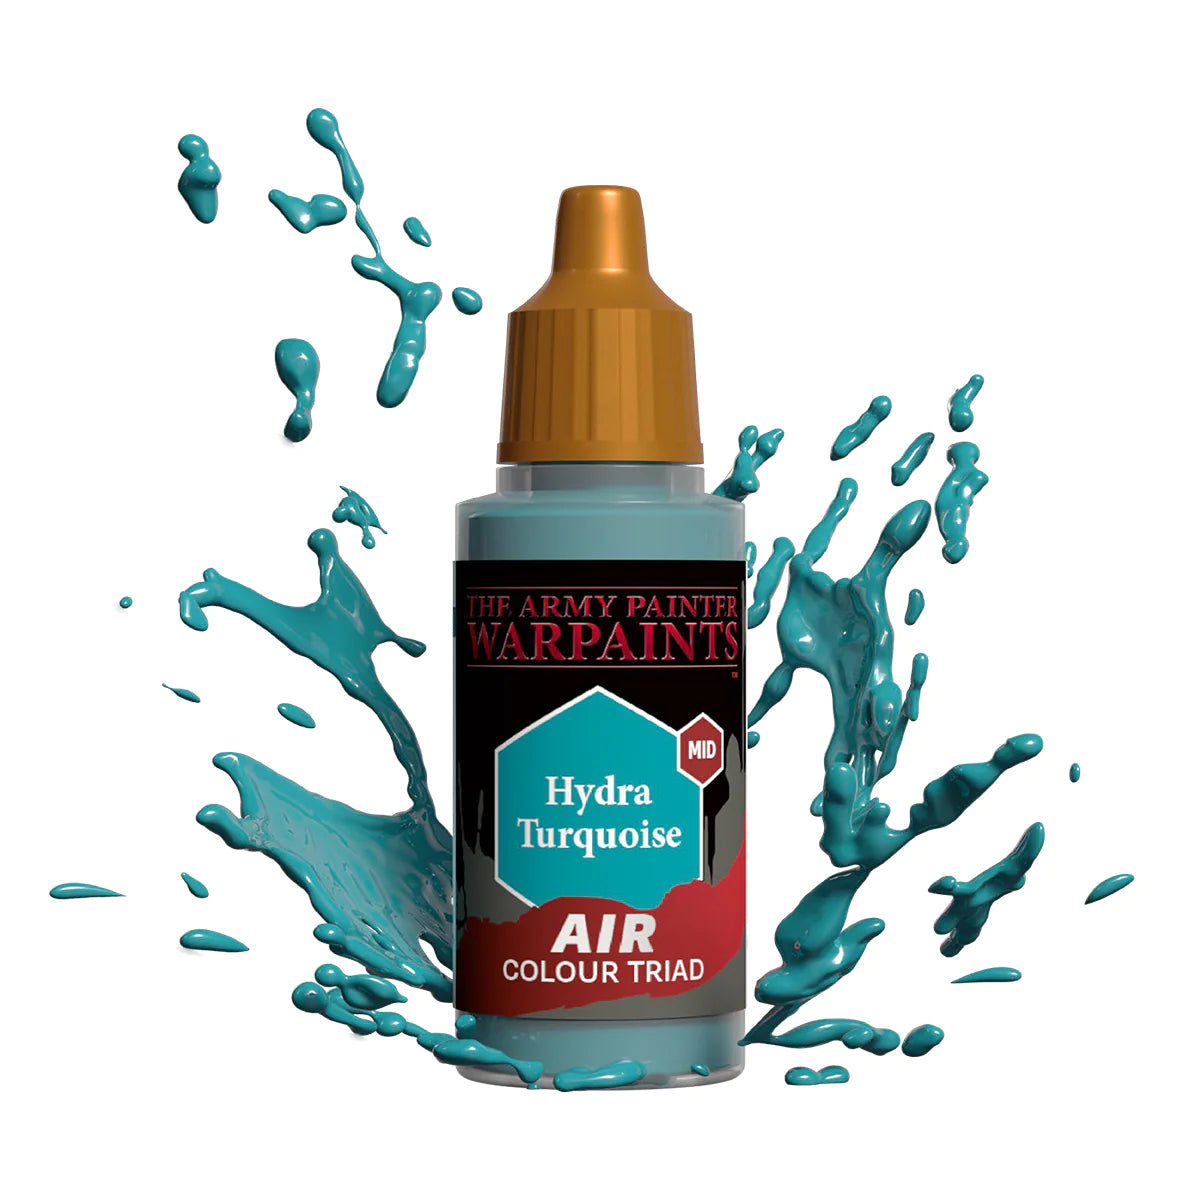 Air Hydra Turquoise Army Painter Warpaints